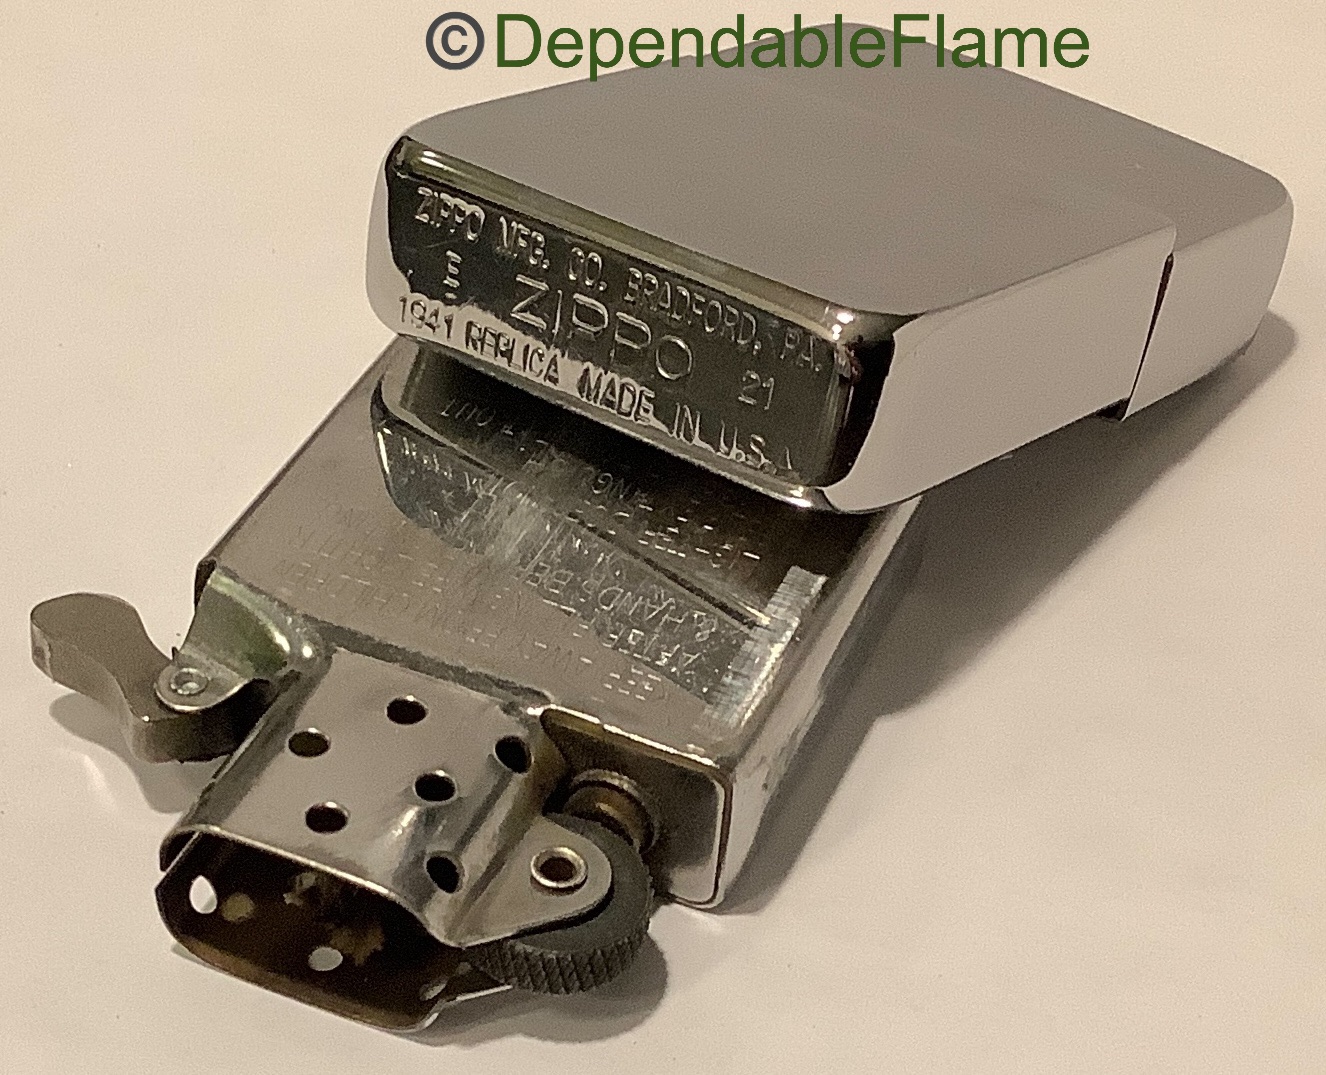 Zippo Lighter Review: How Many Different Replica Zippo Lighters